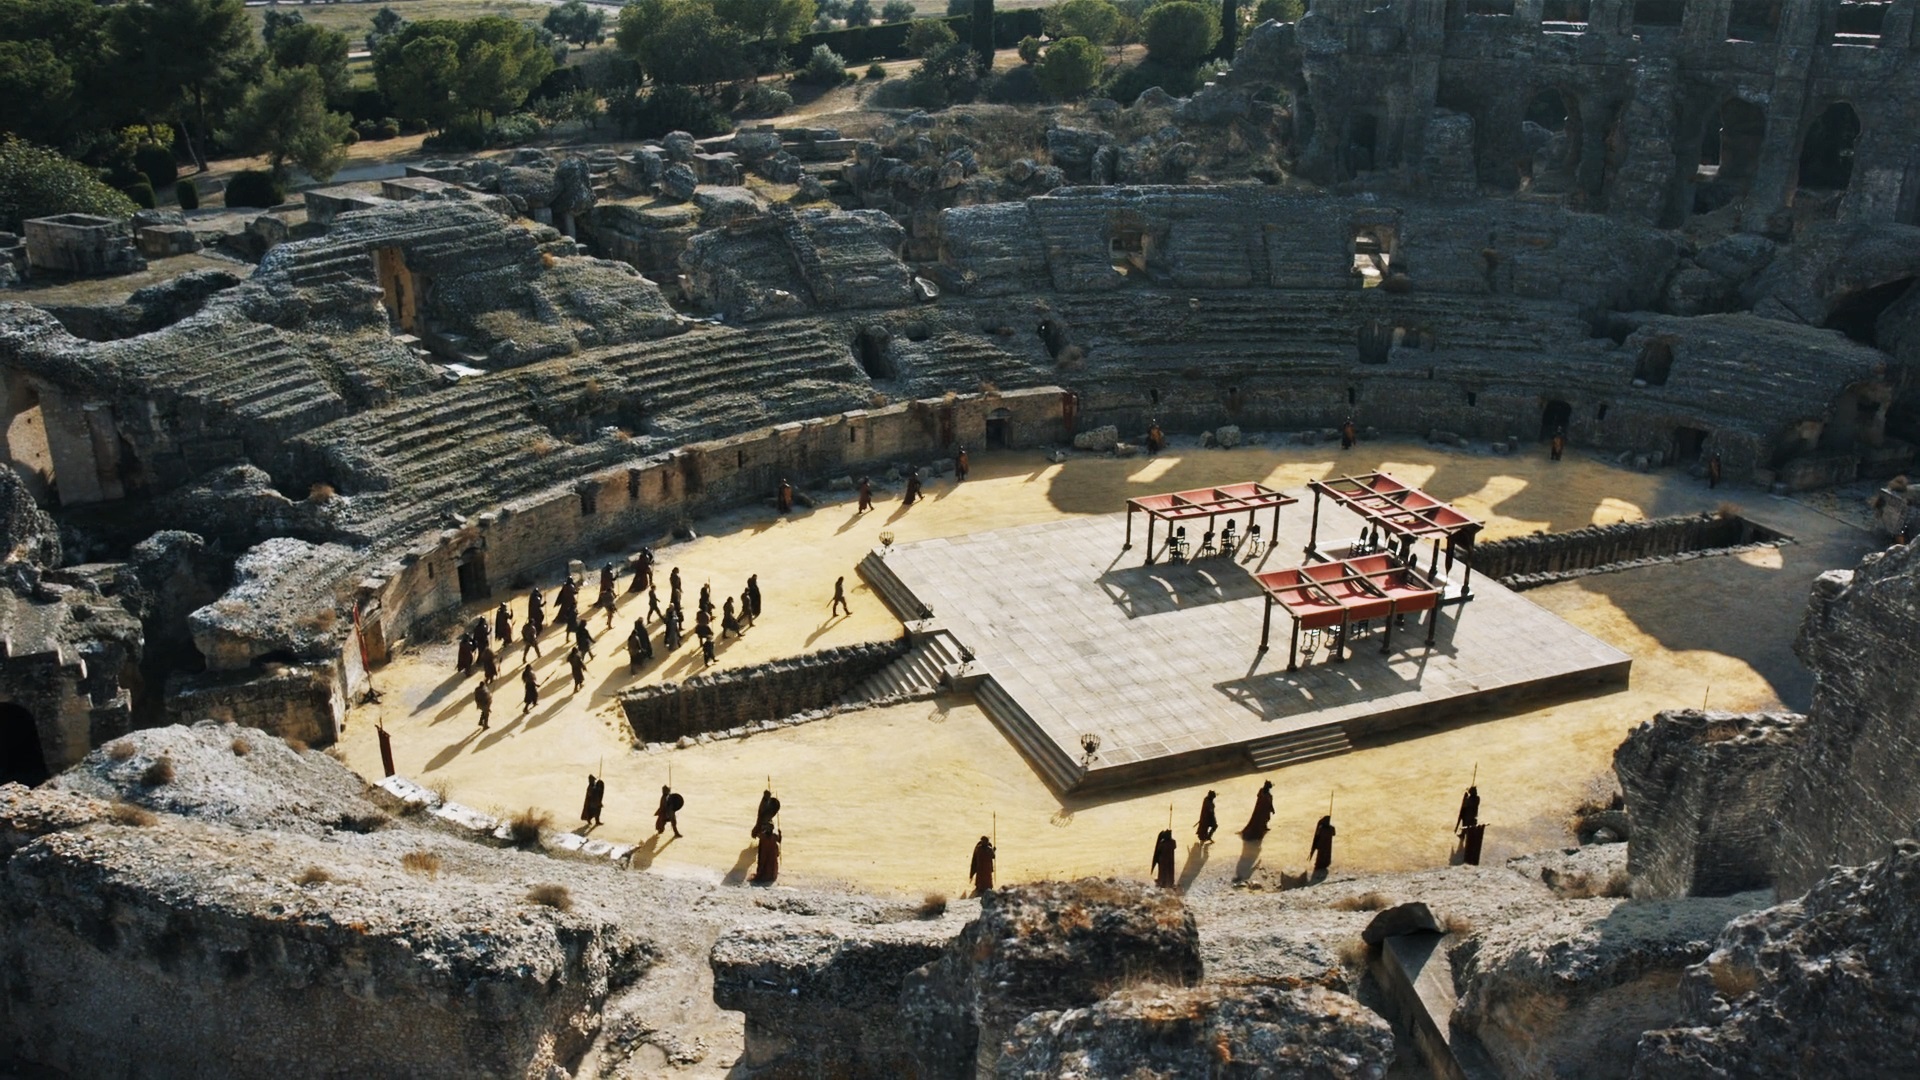 The podium or dais was the focus of the Dragonpit scene in season seven